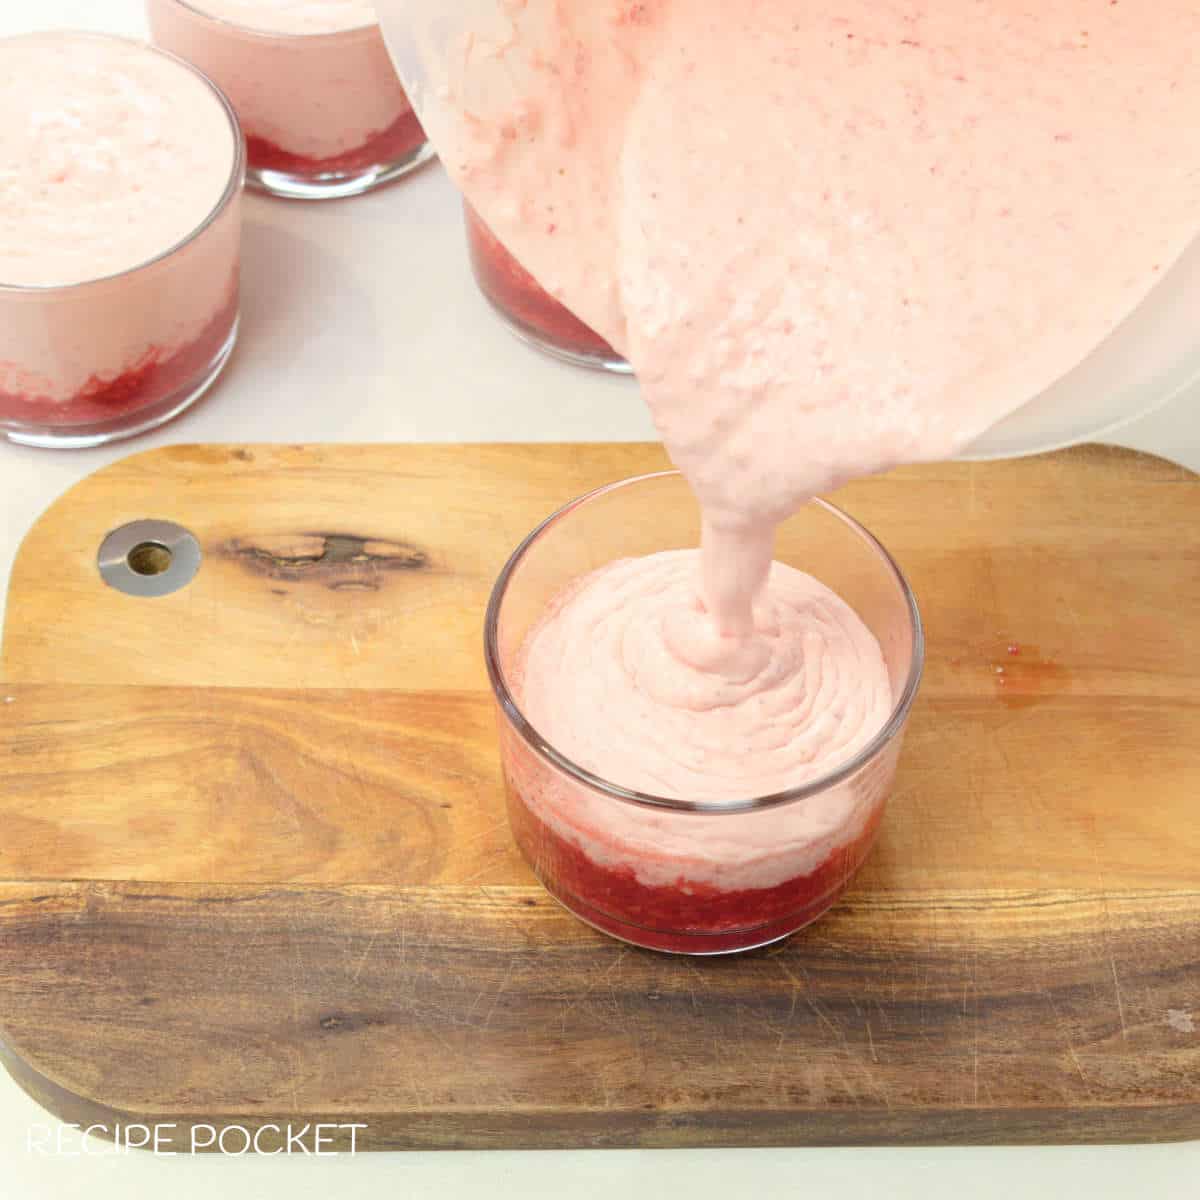 Strawberry cream being poured into a glass.